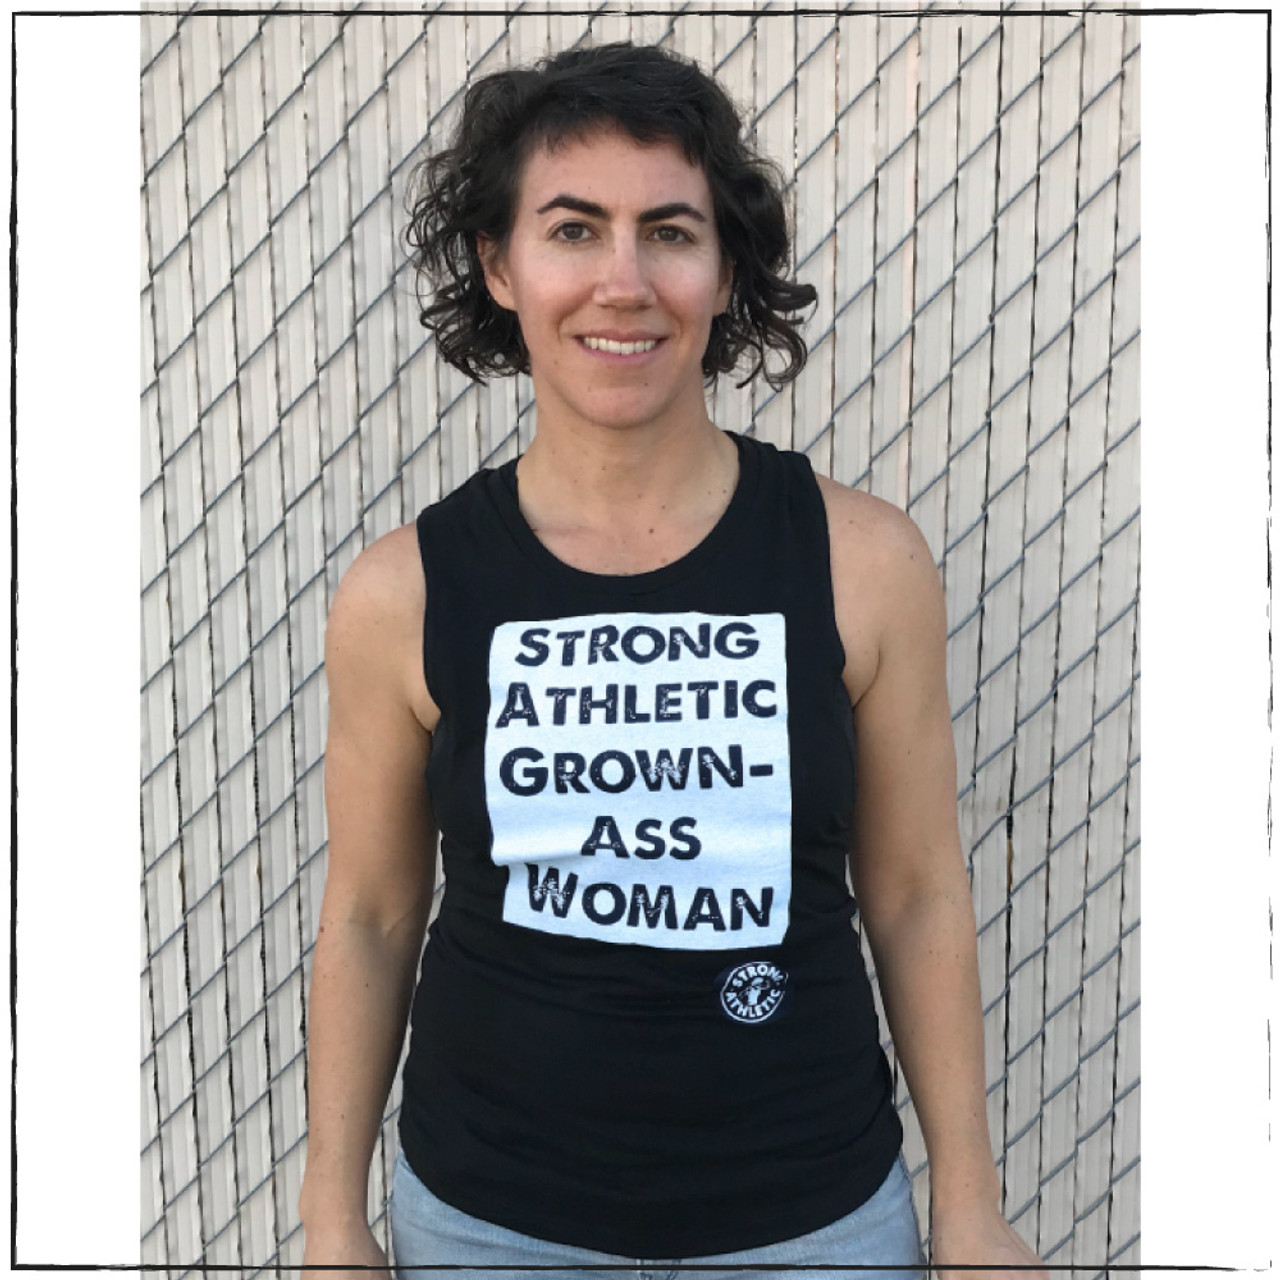 Strong Athletic Grown-Ass Woman Muscle Tank Solid Black with White Ink